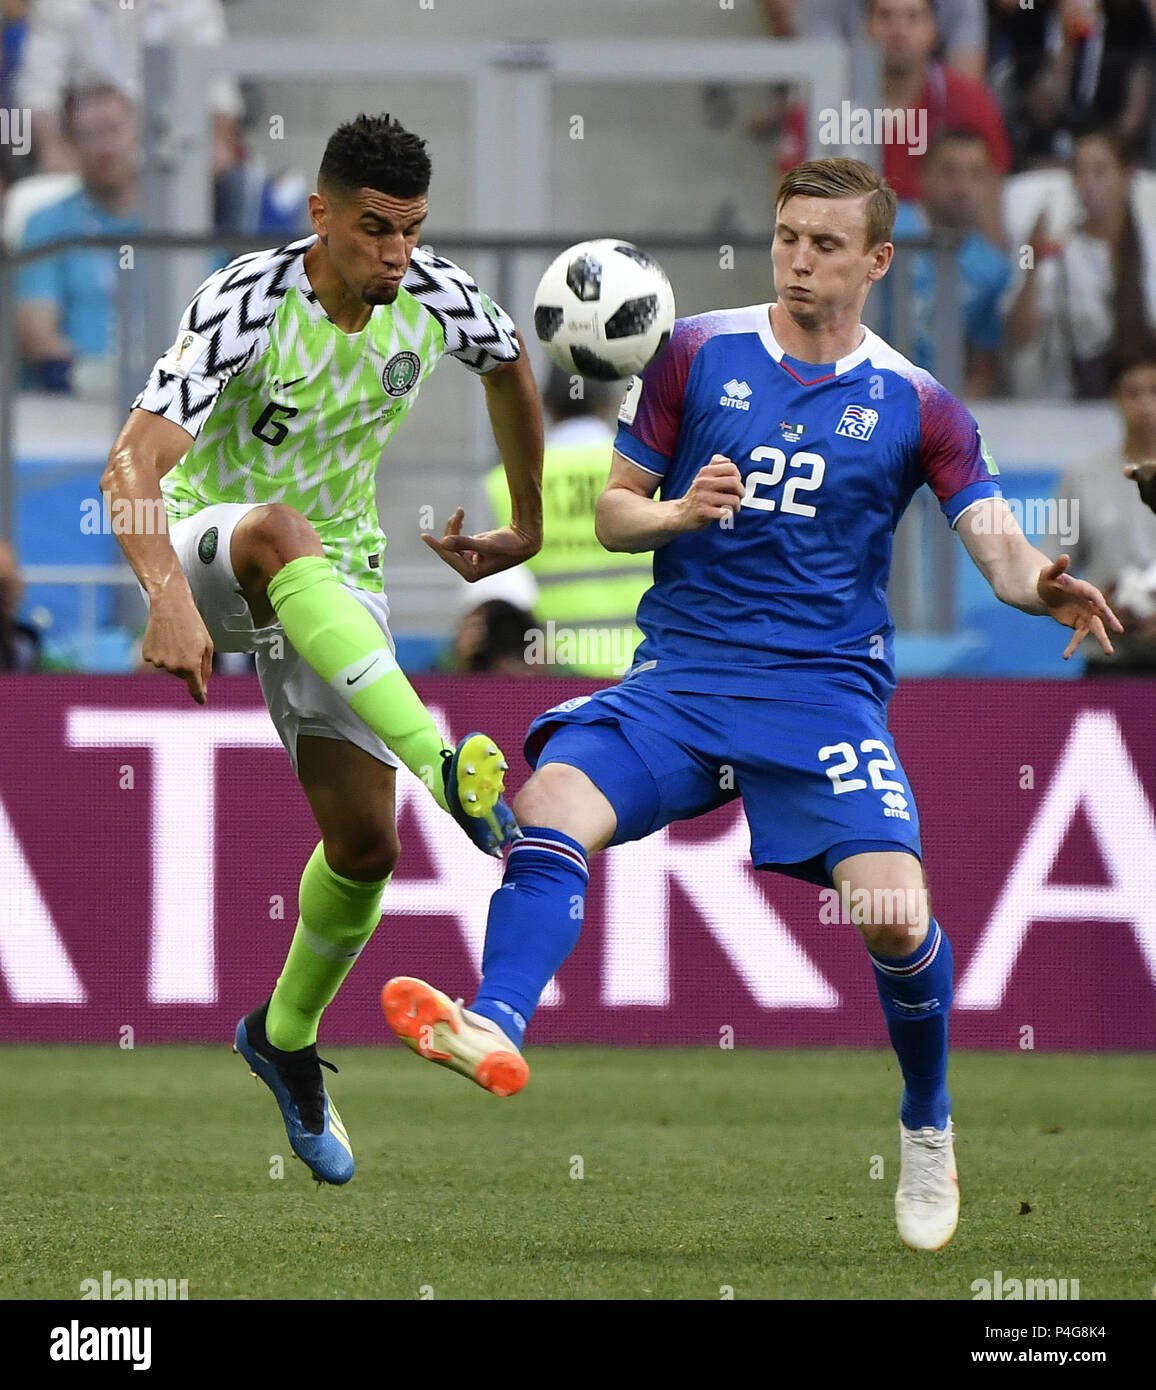 Volgograd, Russia. 22nd June, 2018. Leon Balogun (L) of Nigeria vies with Jon Bodvarsson of Iceland during the 2018 FIFA World Cup Group D match between Nigeria and Iceland in Volgograd, Russia, June 22, 2018. Credit: He Canling/Xinhua/Alamy Live News Stock Photo